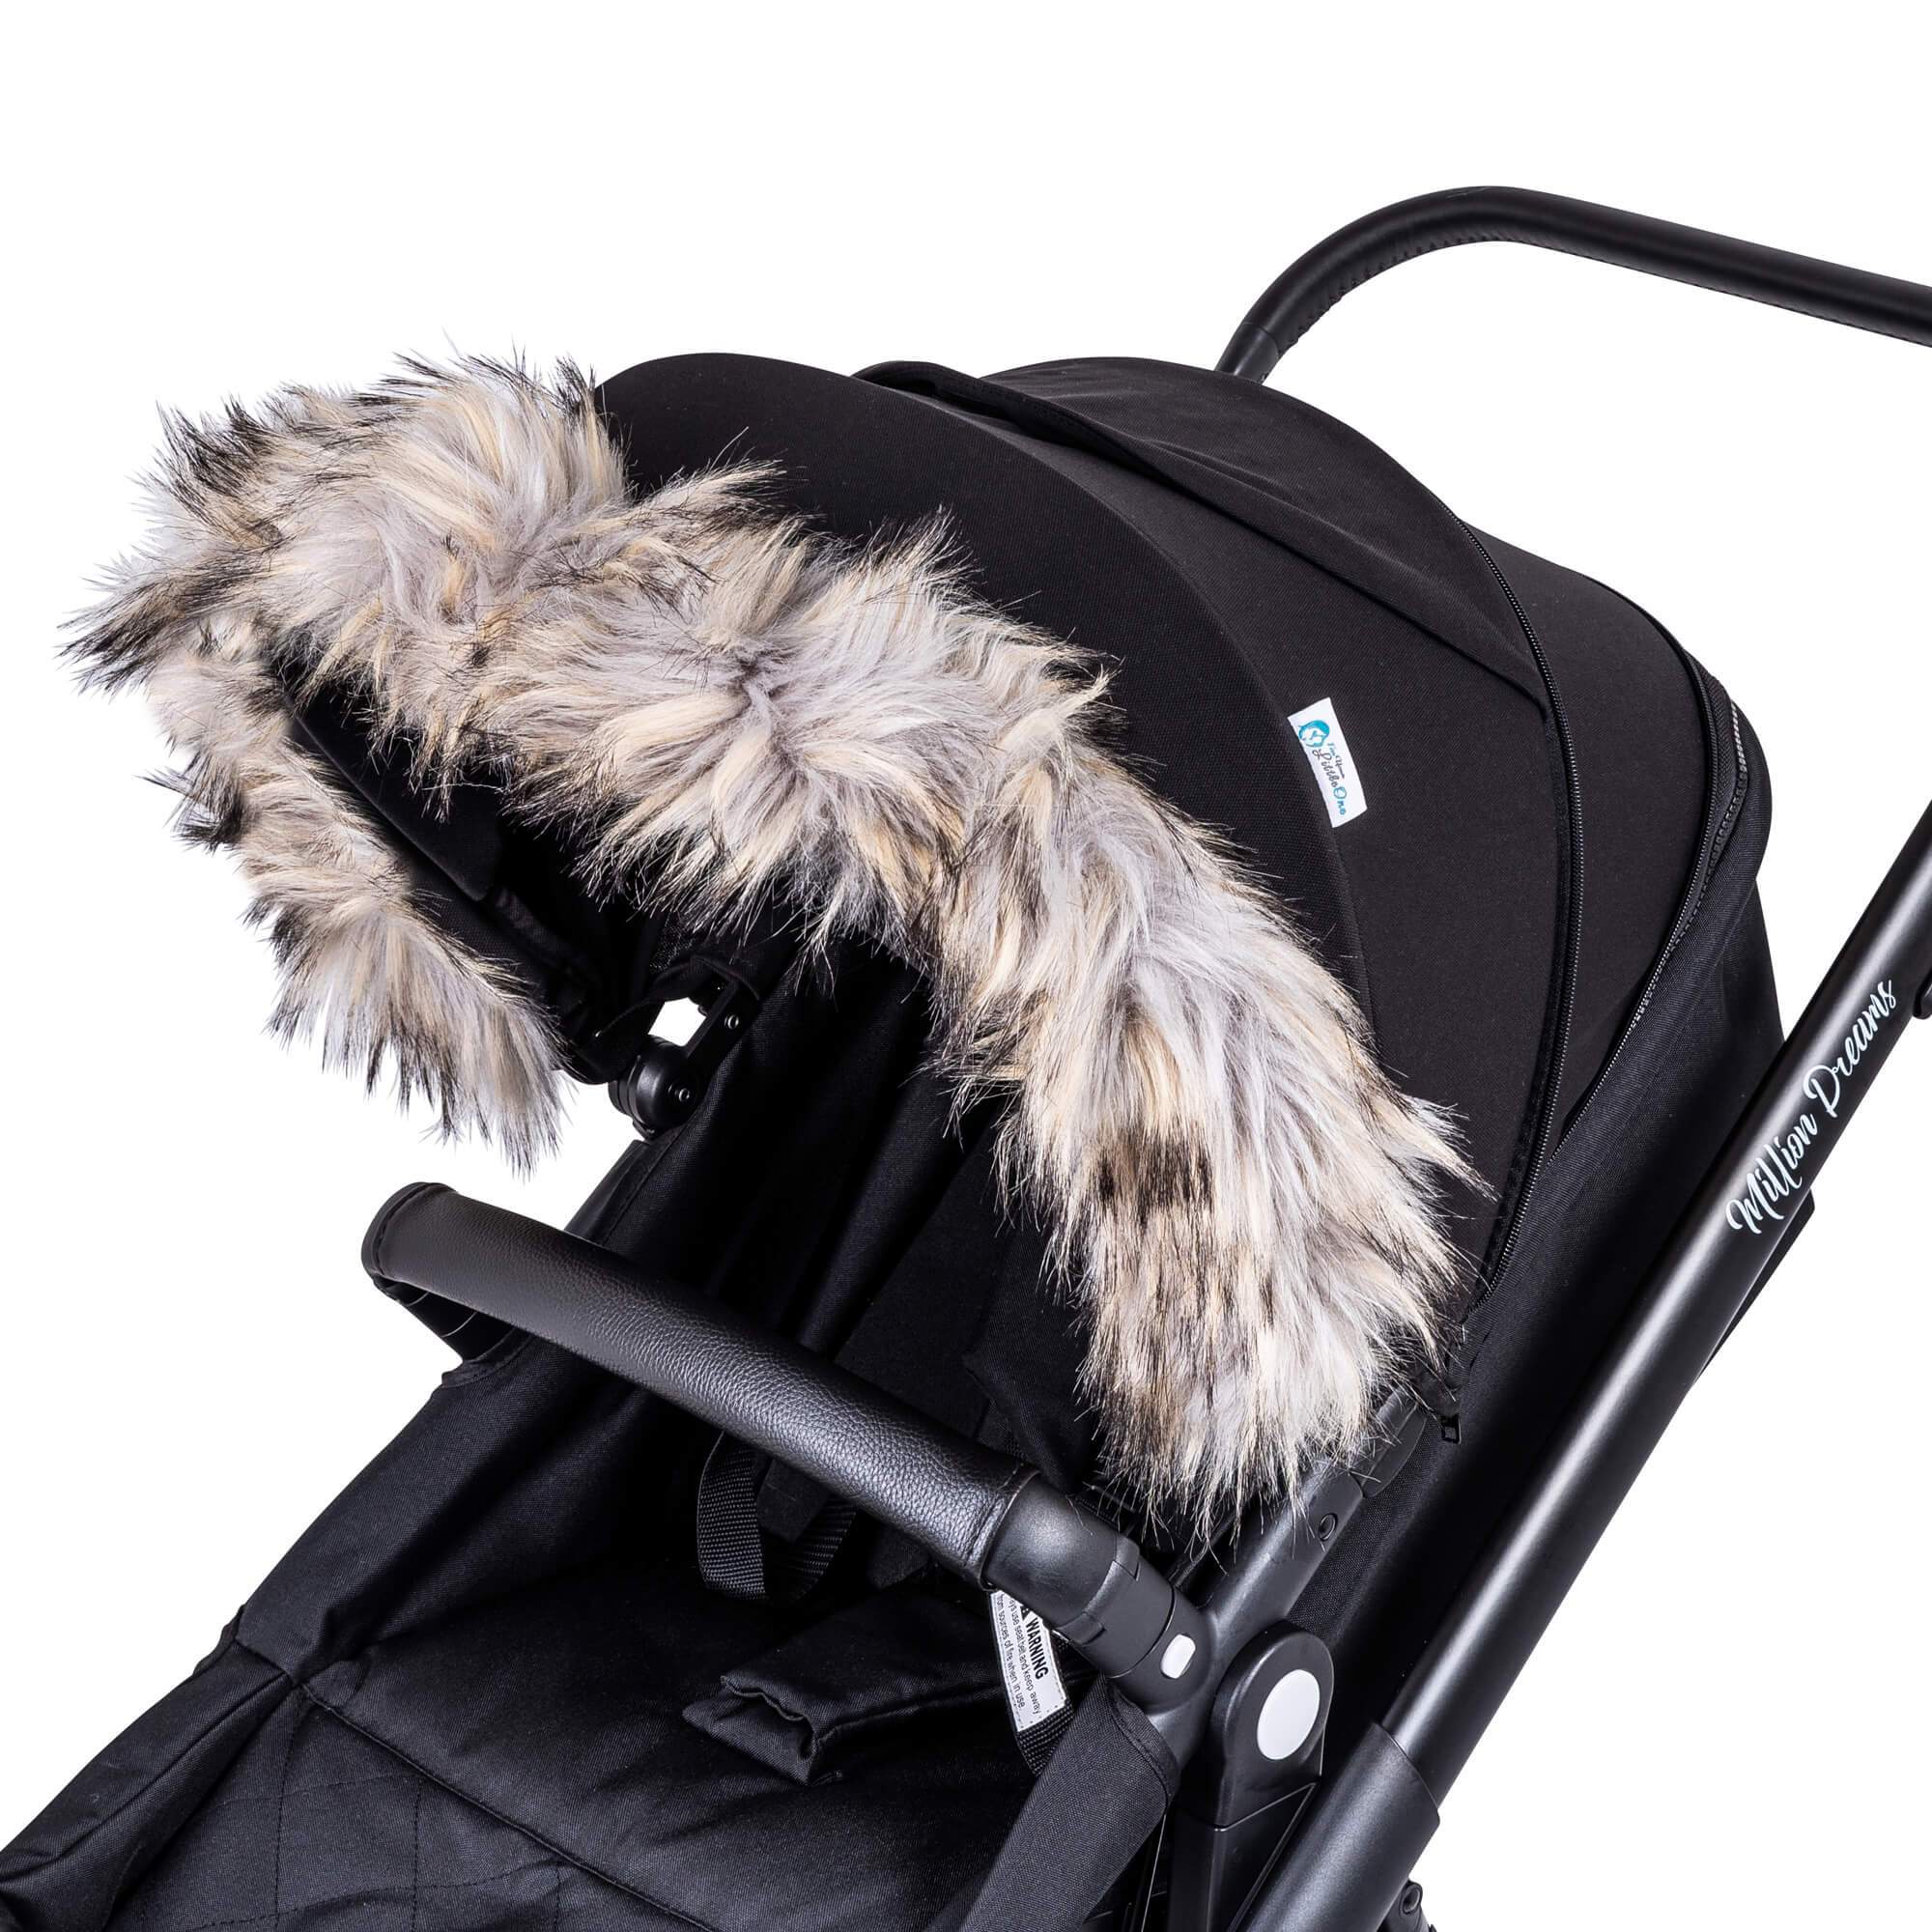 Pram Fur Hood Trim Attachment for Pushchair Compatible with Mountain Buggy - For Your Little One